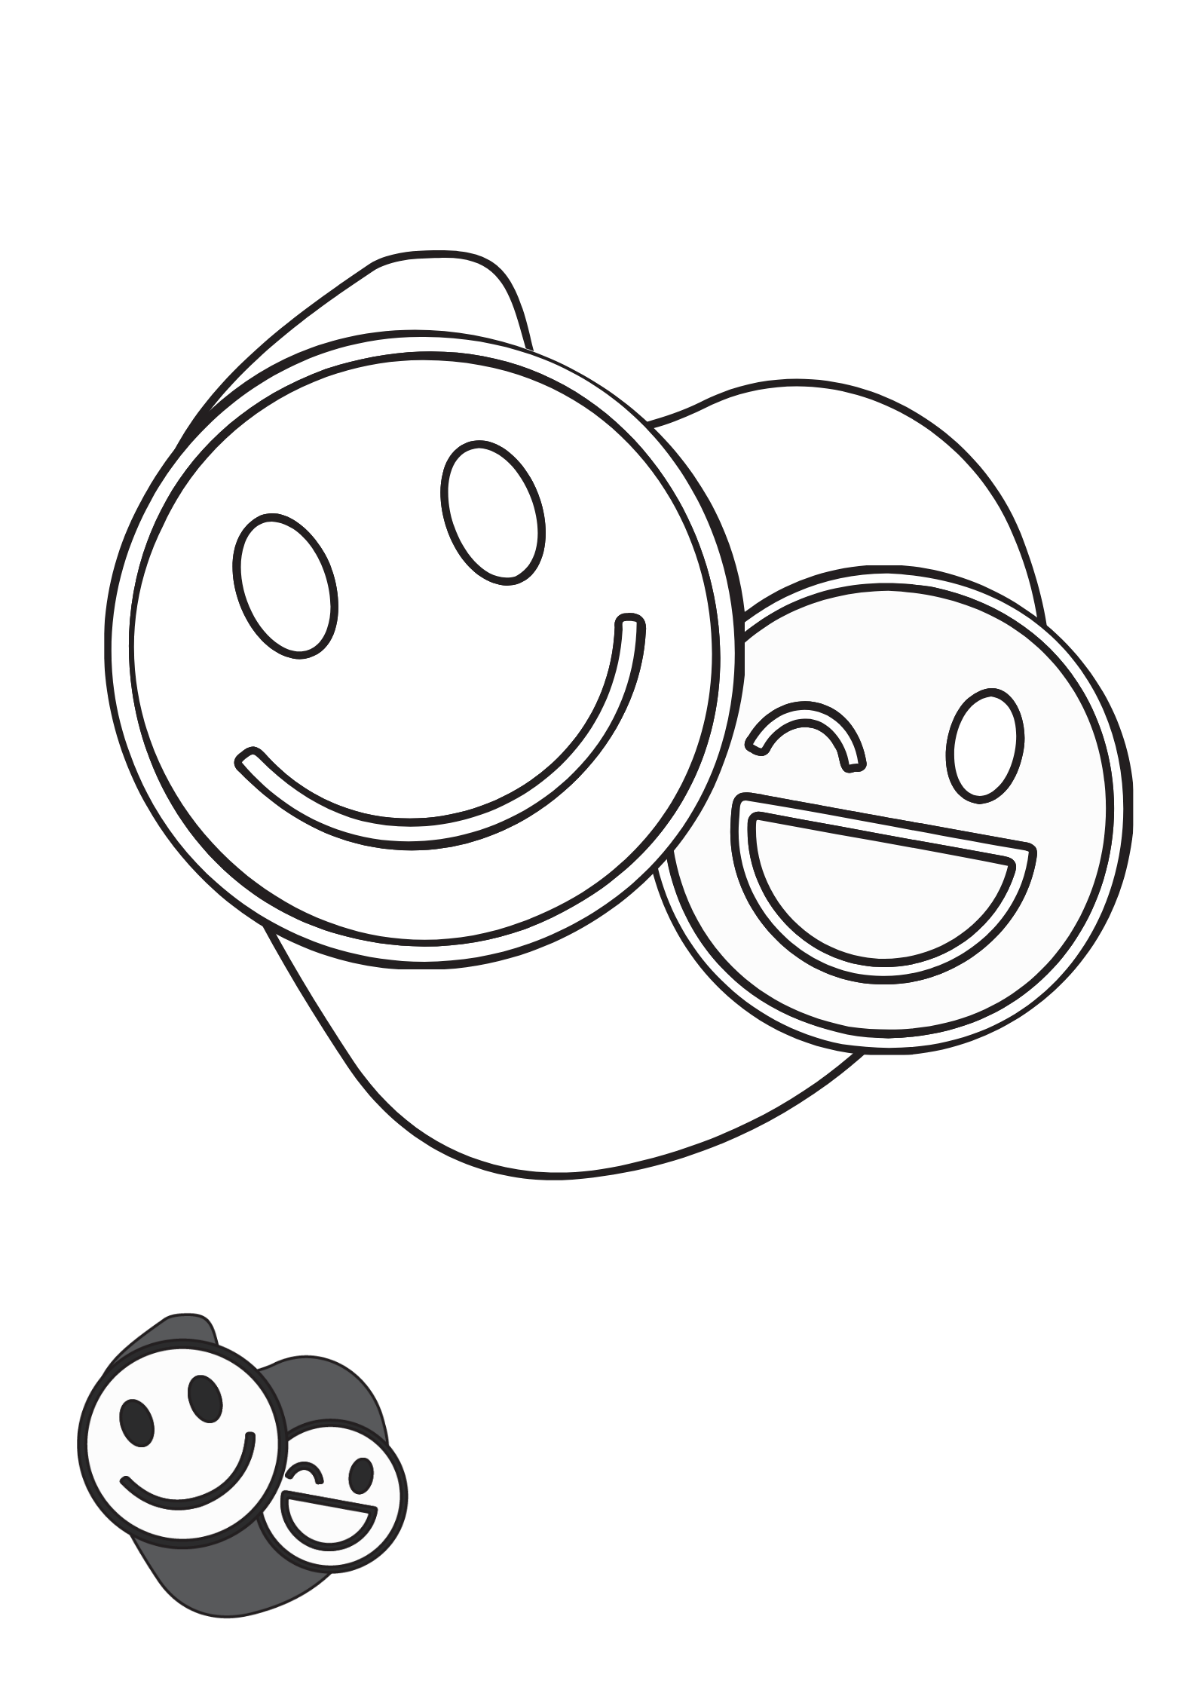 White Smiley coloring page Template